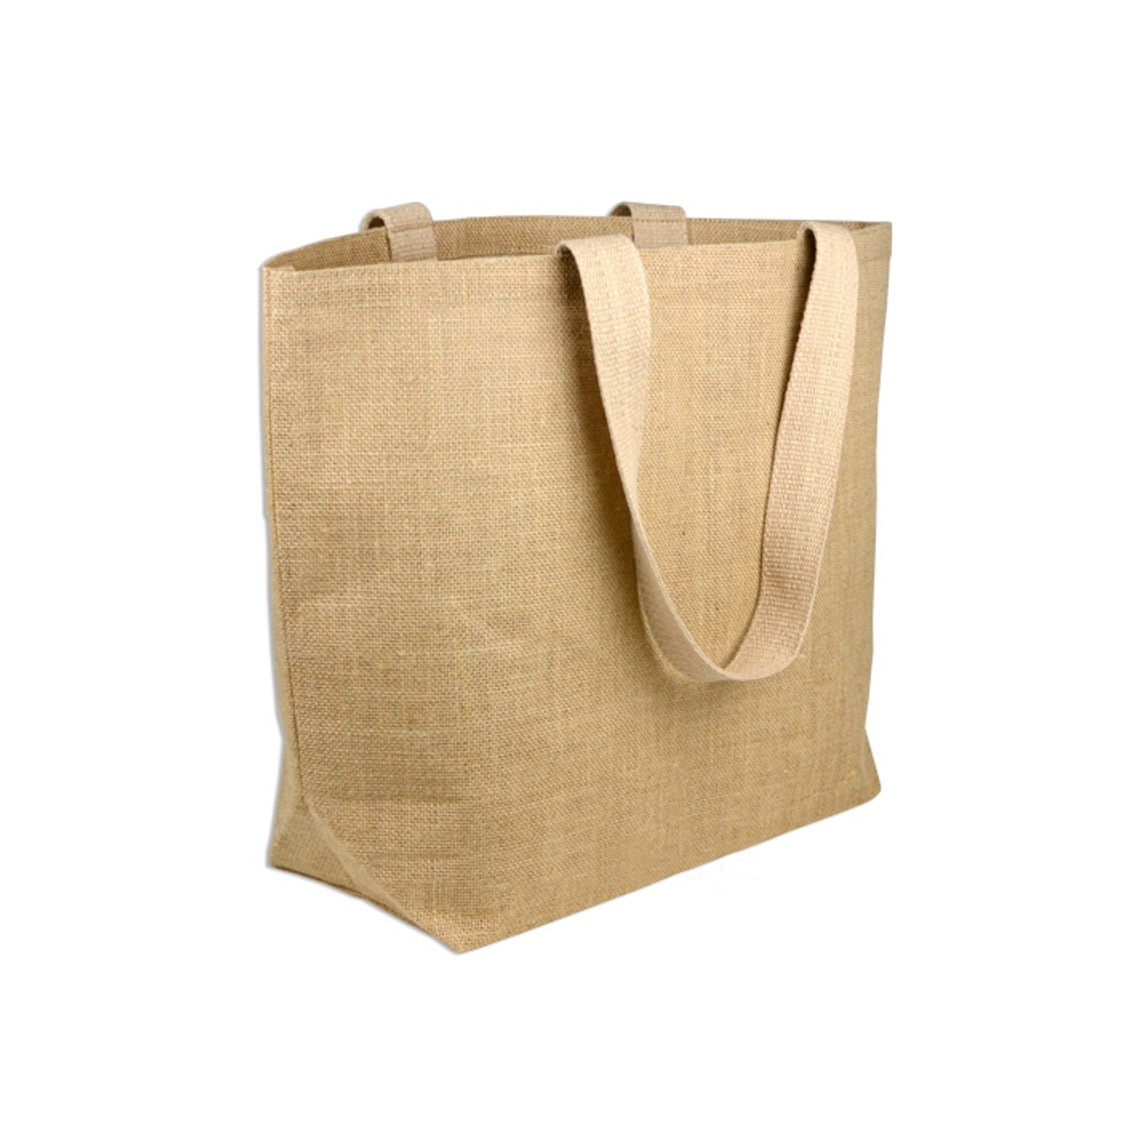 Large Hemp Tote Bag For Our Hemp Fabric Eco Bag Lovers